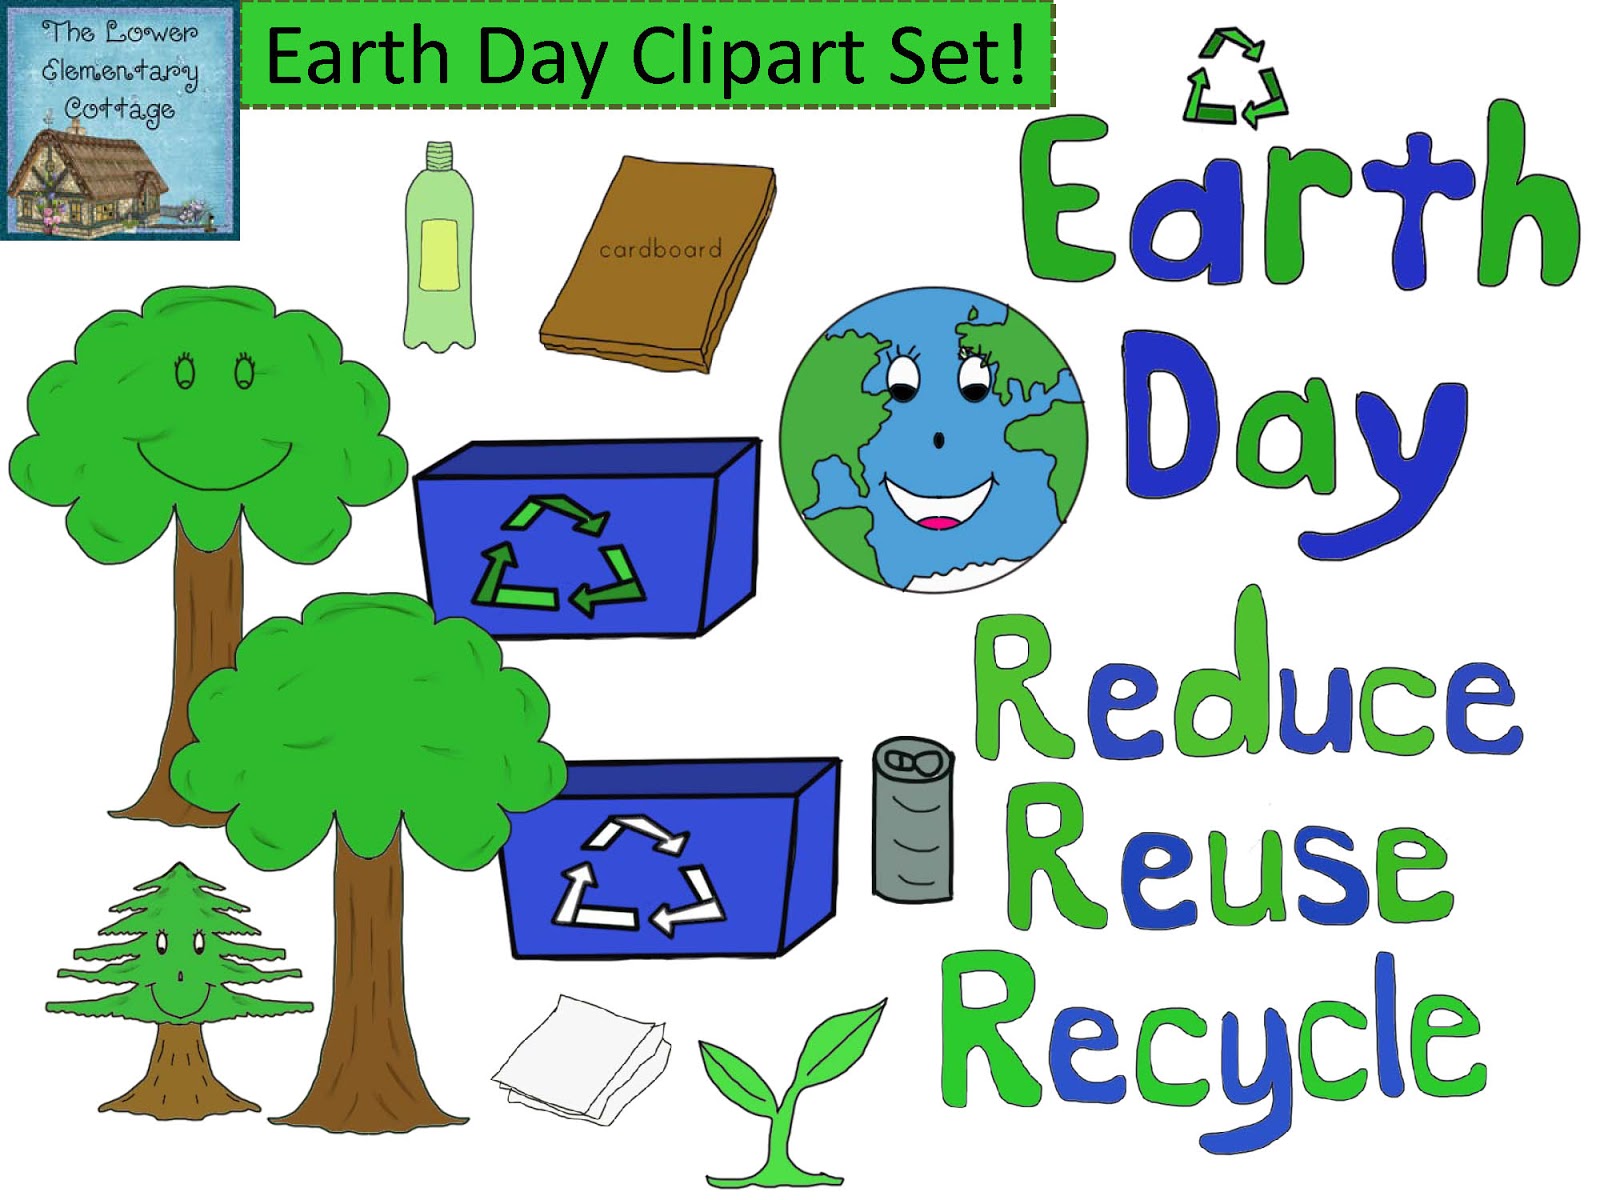 Smiling earth clipart free .